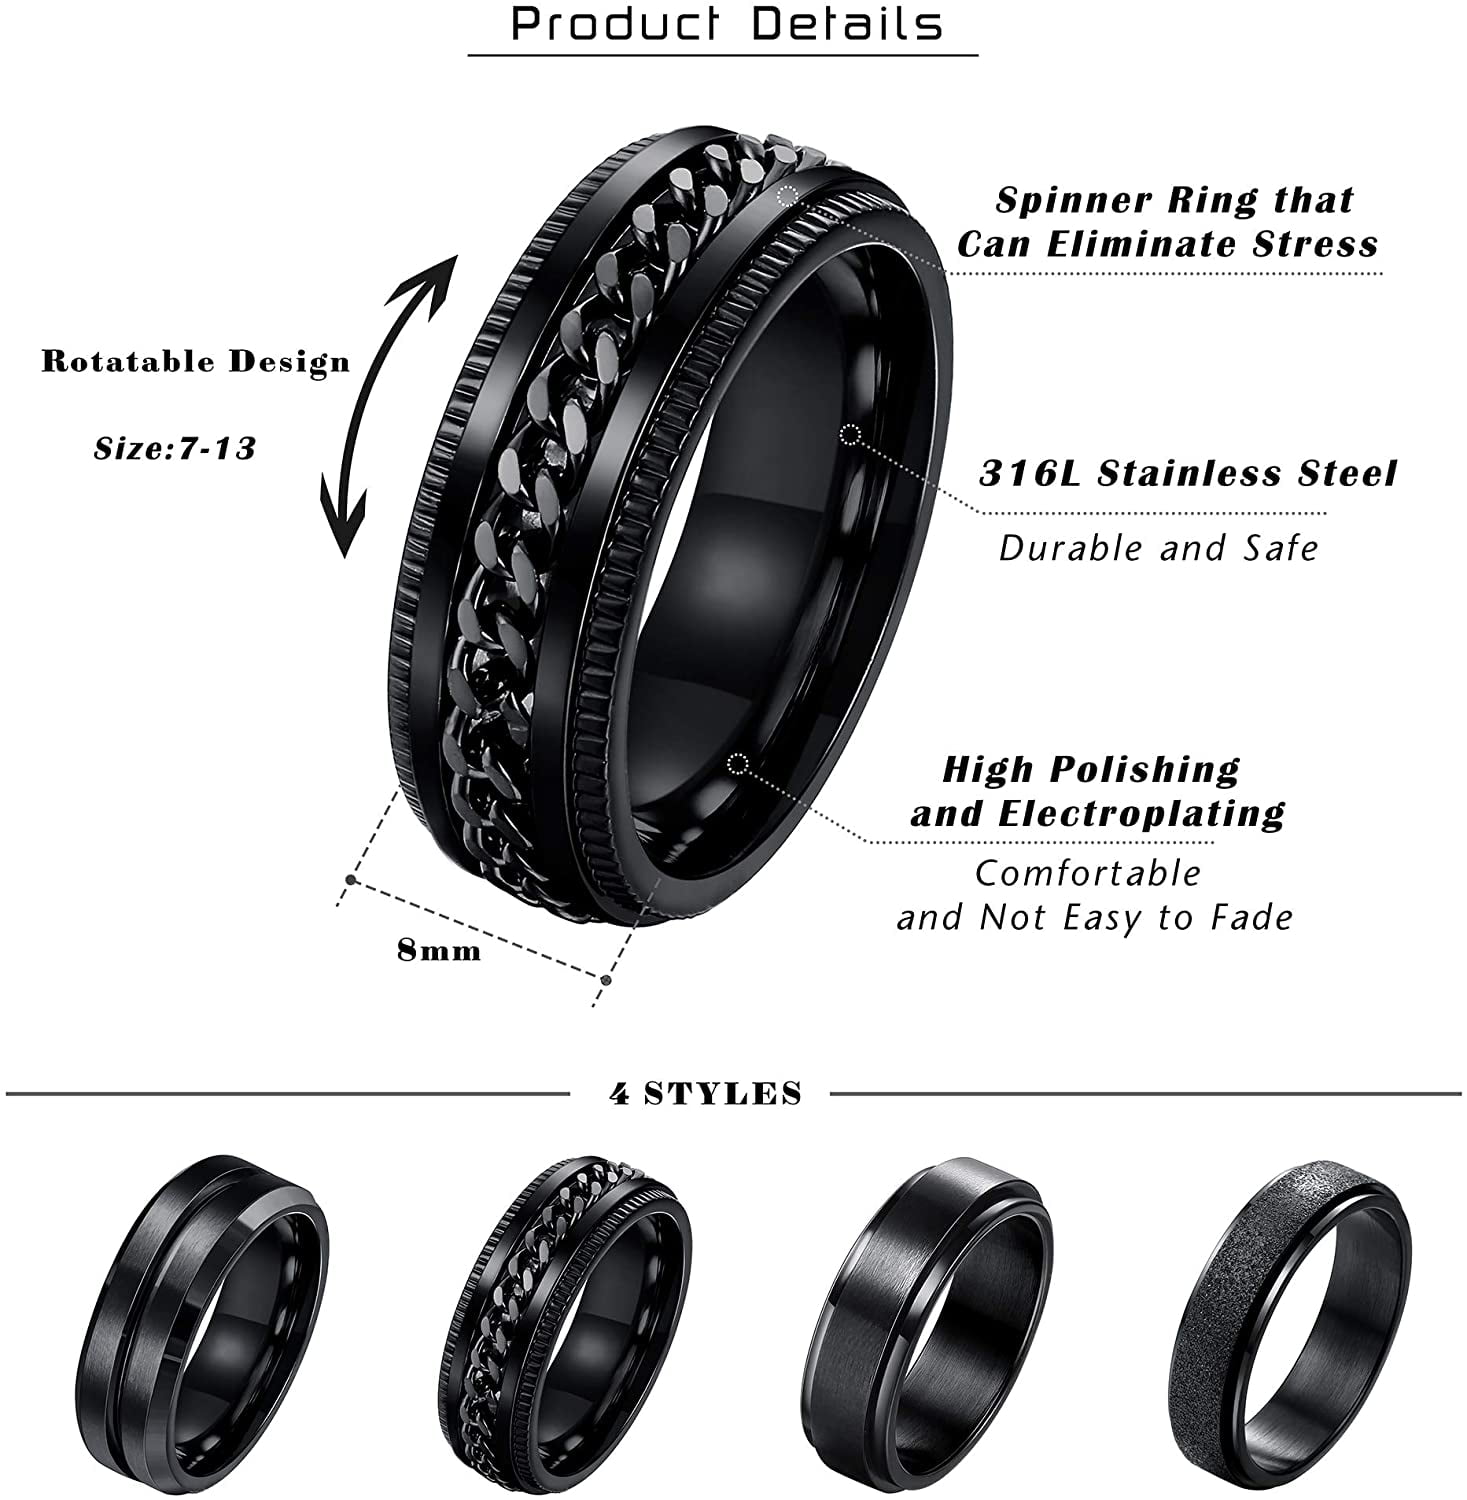 Thunaraz 4 Pieces Black Spinner Rings for Men Women Cool Chain Inlaid Stainless Steel Fidget Ring Set 6-8mm Wide Stress Relieving Fashion Wedding Promise Band Rings Size 7-13 